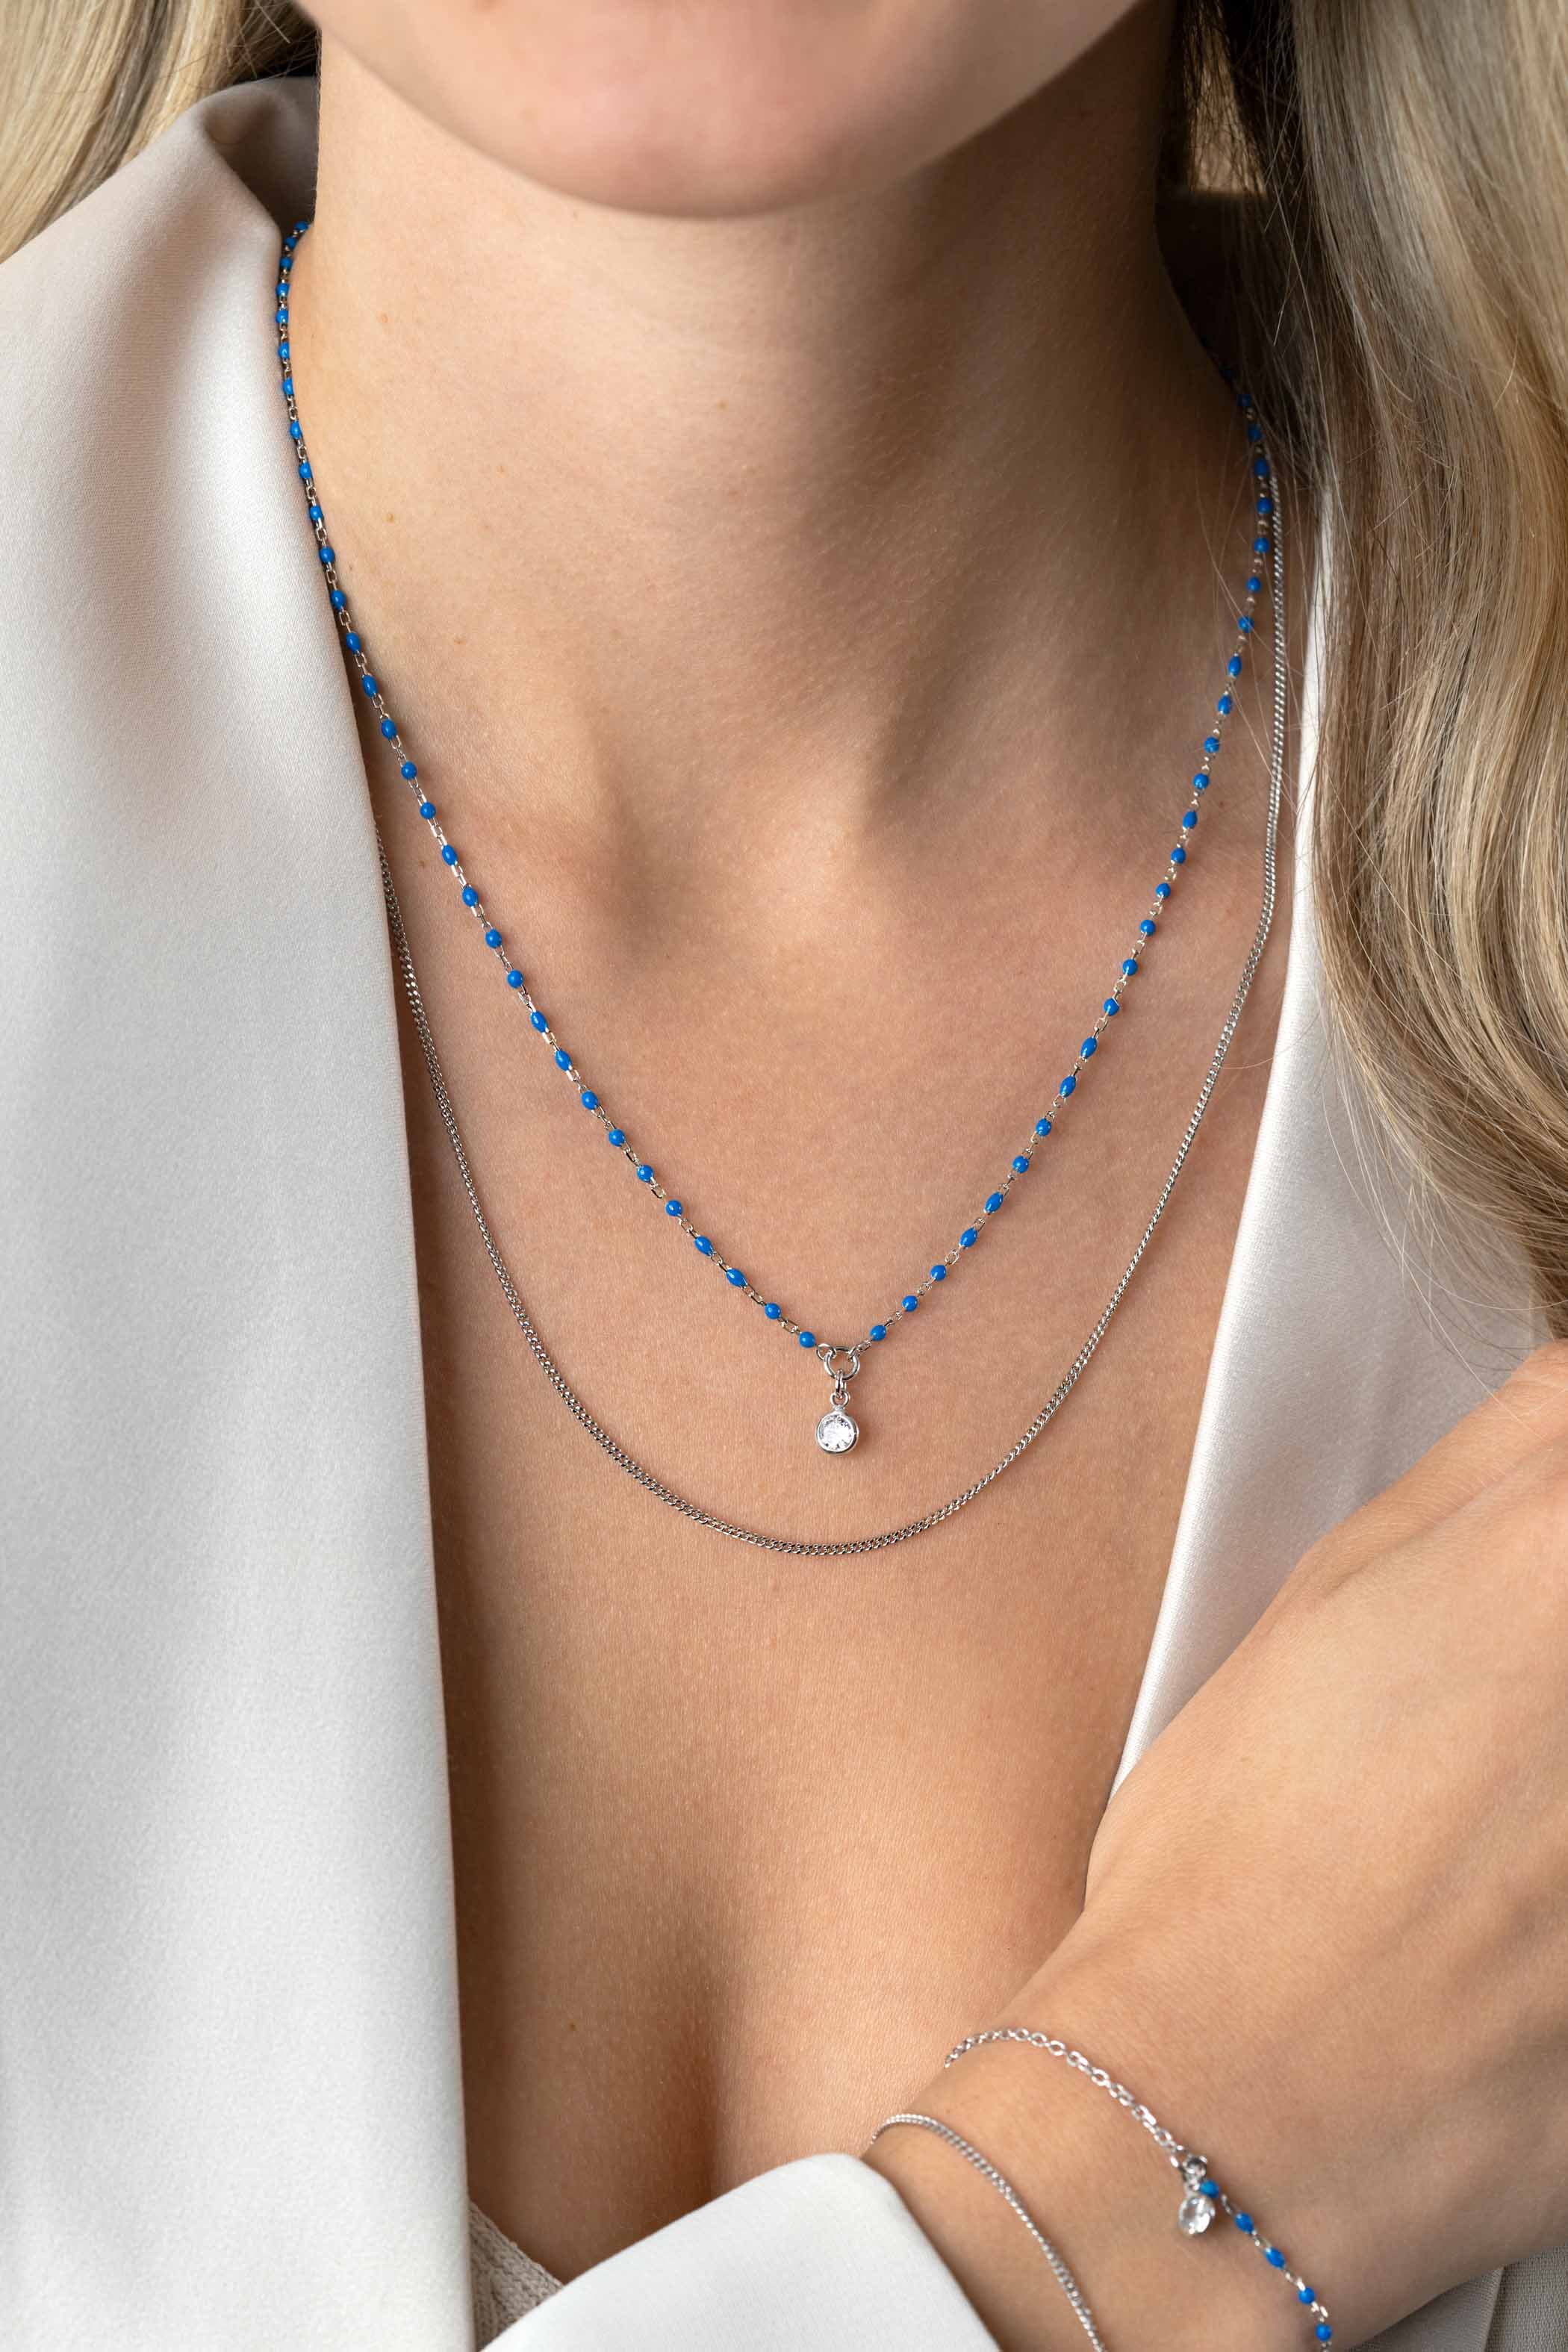 ZINZI Sterling Silver Multi-look Necklace Curb and Blue Bead Chain with Round Setting with White Zirconia 42-45cm ZIC2529